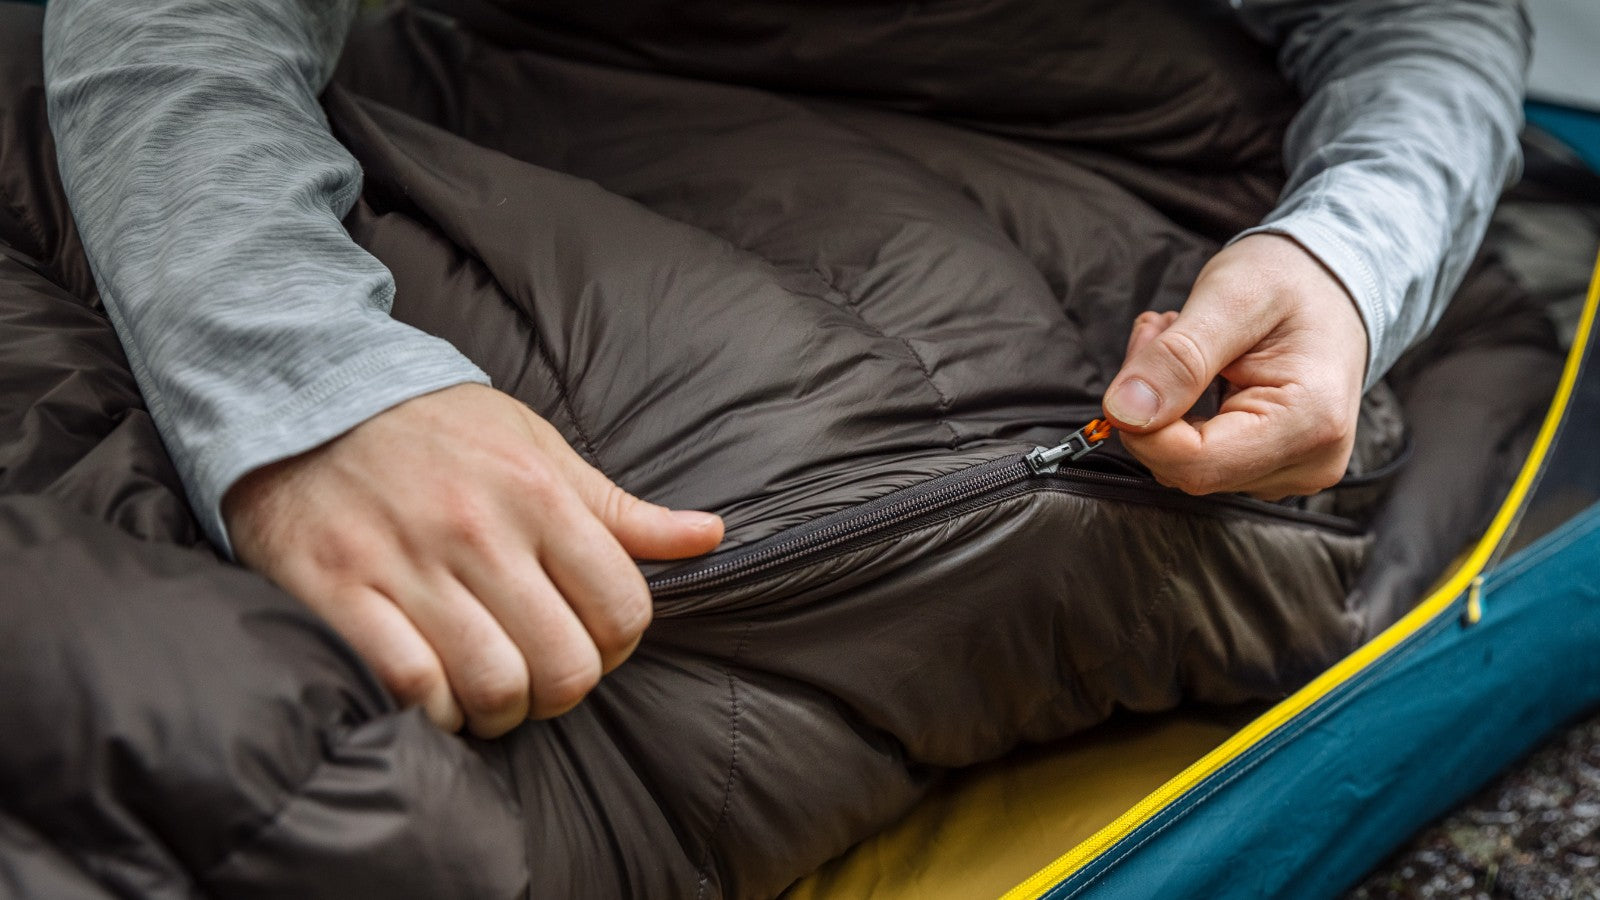 Zipping the convertible top quilt onto the fitted sheet to create a complete sleeping bag. The Zenbivy Bed has been designed with both left and right side zippers to let you sleep exactly how you want to. Take a tour of the original Zenbivy Bed